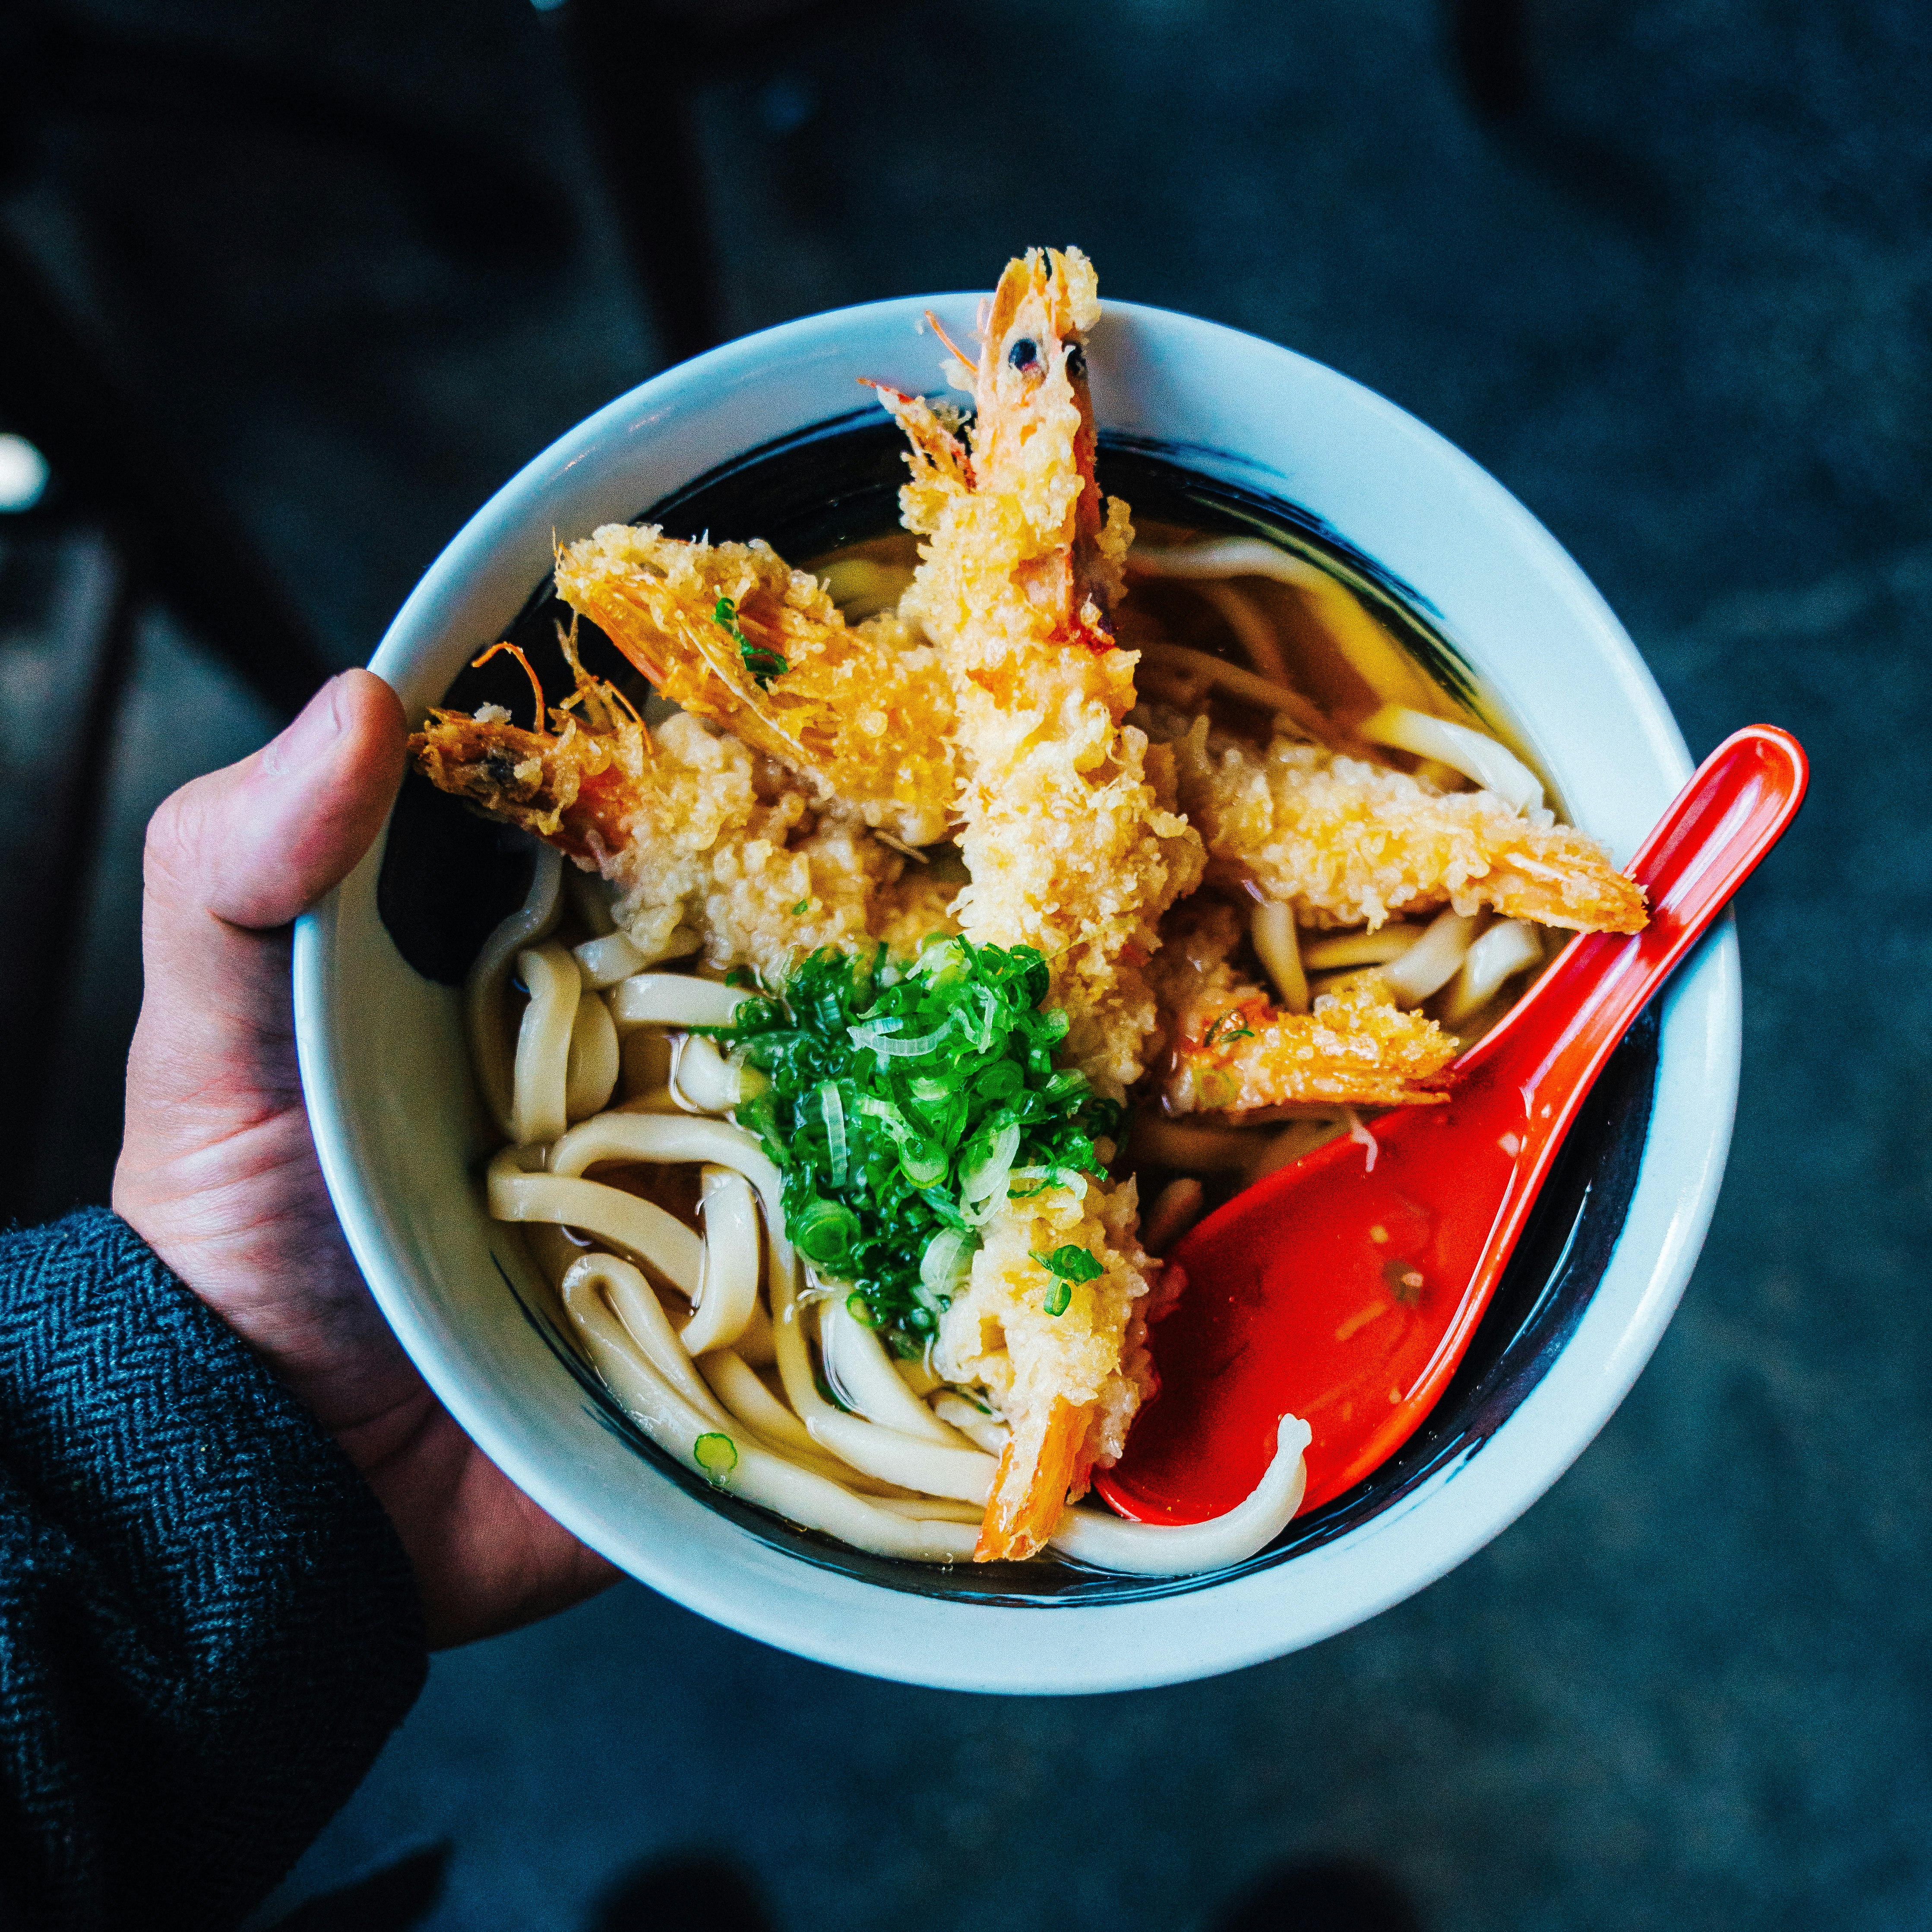 A hand holds a bowl with noodles, broth and fried prawns